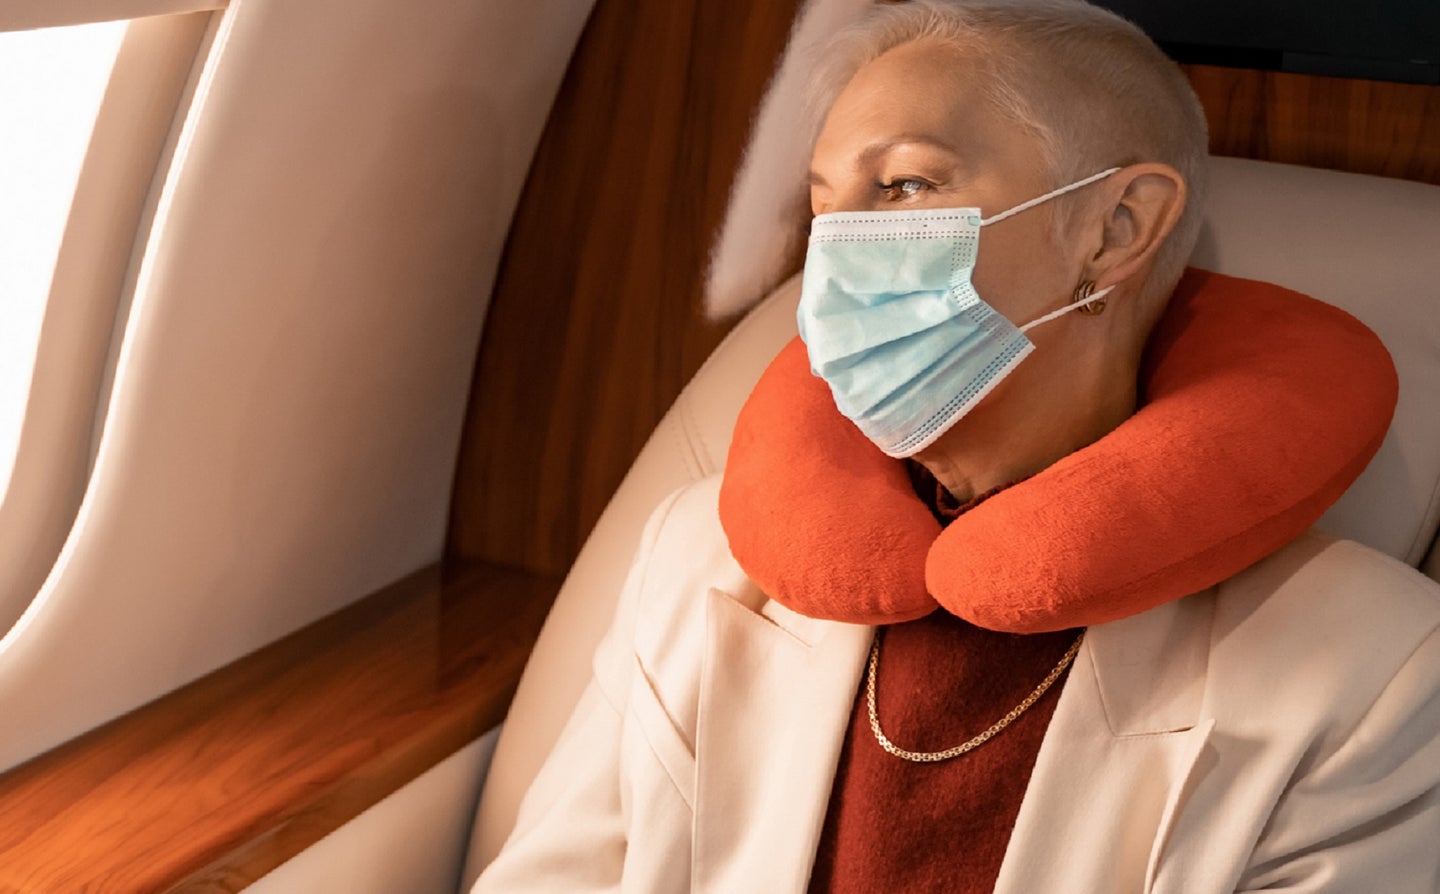 Plane traveler wearing a COVID mask with an orange neck pillow looking out window after CDC lifted COVID testing policy for international flights